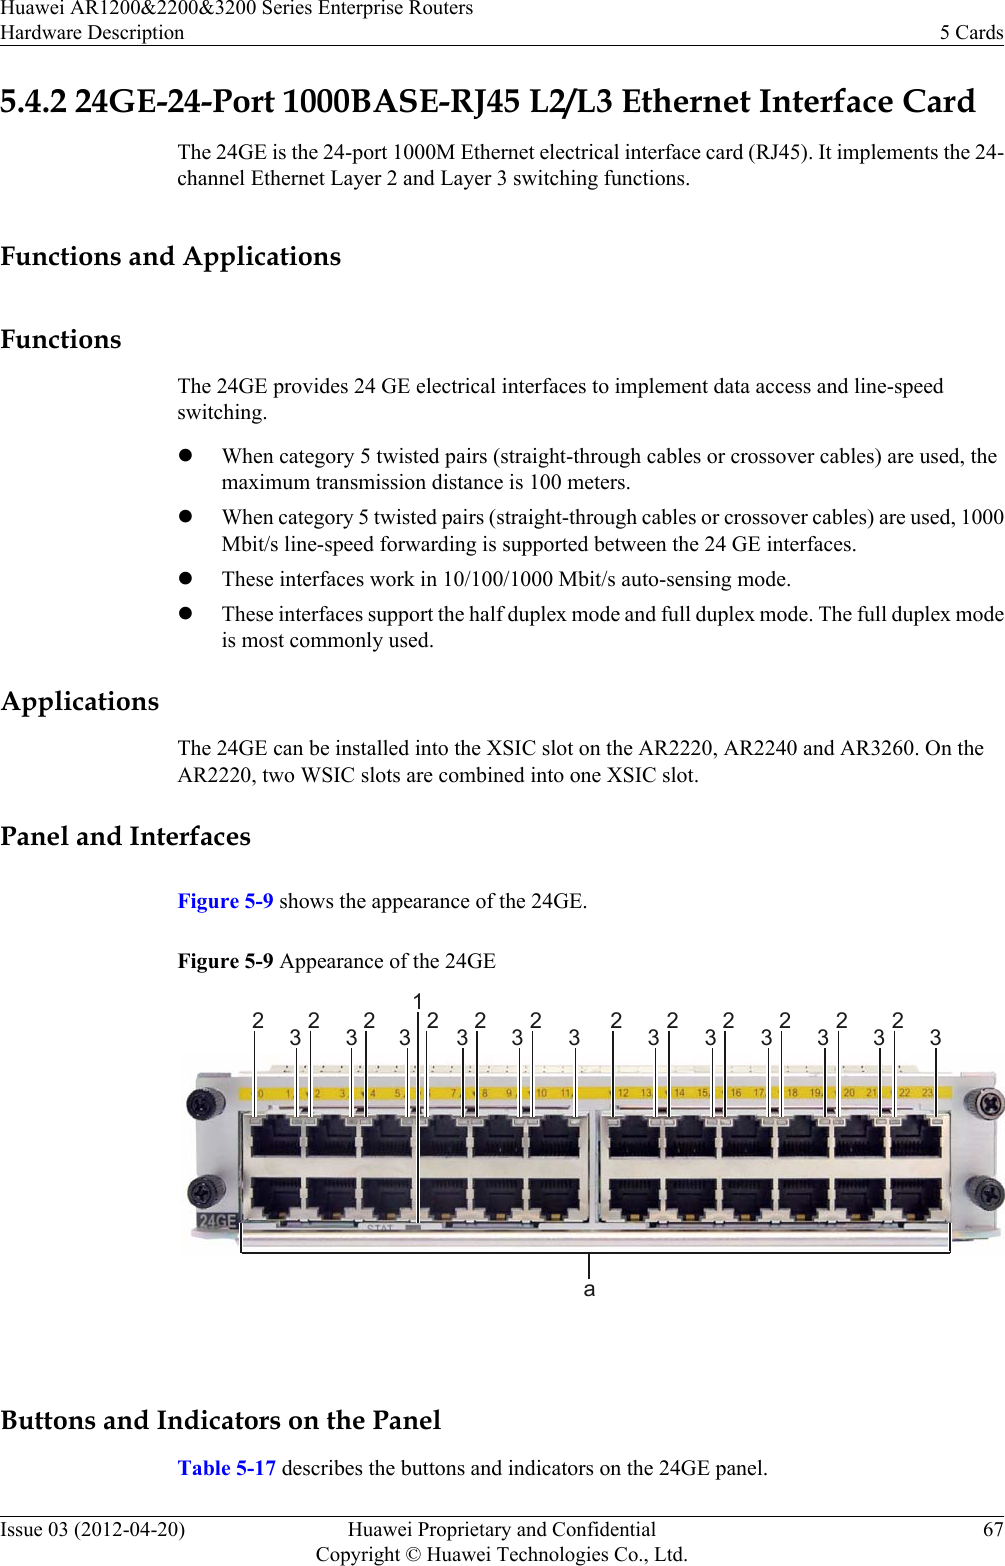 5.4.2 24GE-24-Port 1000BASE-RJ45 L2/L3 Ethernet Interface CardThe 24GE is the 24-port 1000M Ethernet electrical interface card (RJ45). It implements the 24-channel Ethernet Layer 2 and Layer 3 switching functions.Functions and ApplicationsFunctionsThe 24GE provides 24 GE electrical interfaces to implement data access and line-speedswitching.lWhen category 5 twisted pairs (straight-through cables or crossover cables) are used, themaximum transmission distance is 100 meters.lWhen category 5 twisted pairs (straight-through cables or crossover cables) are used, 1000Mbit/s line-speed forwarding is supported between the 24 GE interfaces.lThese interfaces work in 10/100/1000 Mbit/s auto-sensing mode.lThese interfaces support the half duplex mode and full duplex mode. The full duplex modeis most commonly used.ApplicationsThe 24GE can be installed into the XSIC slot on the AR2220, AR2240 and AR3260. On theAR2220, two WSIC slots are combined into one XSIC slot.Panel and InterfacesFigure 5-9 shows the appearance of the 24GE.Figure 5-9 Appearance of the 24GE1a232323232323232323232323 Buttons and Indicators on the PanelTable 5-17 describes the buttons and indicators on the 24GE panel.Huawei AR1200&amp;2200&amp;3200 Series Enterprise RoutersHardware Description 5 CardsIssue 03 (2012-04-20) Huawei Proprietary and ConfidentialCopyright © Huawei Technologies Co., Ltd.67